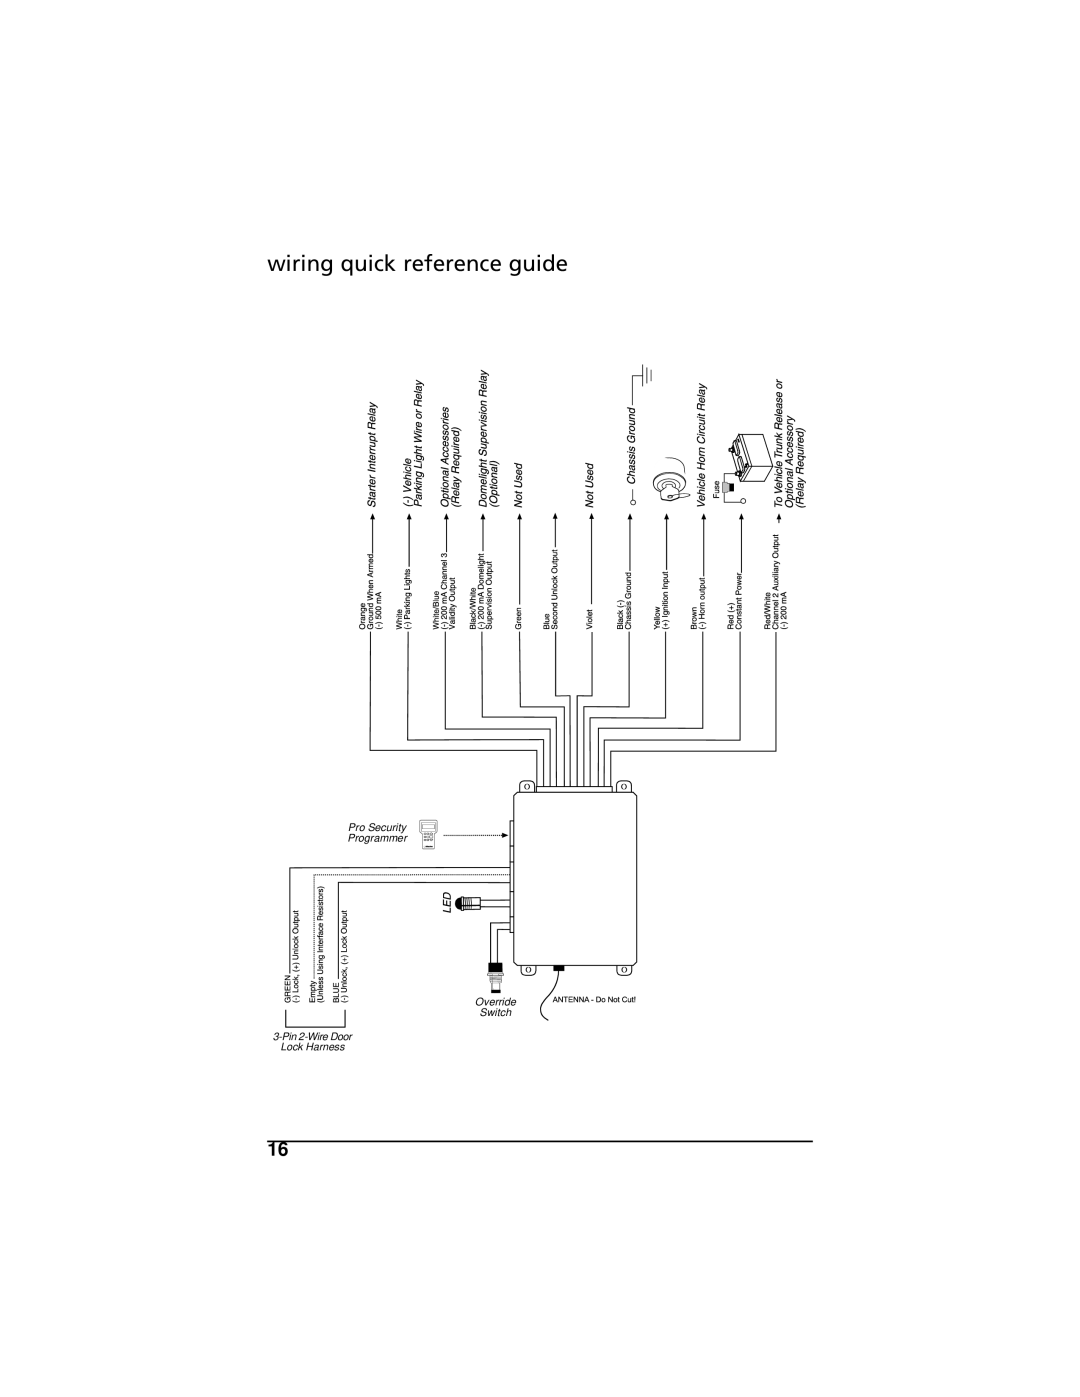 Directed Electronics K10 manual wiring quick reference guide, Pro Security Programmer Override Switch 3-Pin 2-Wire Door 